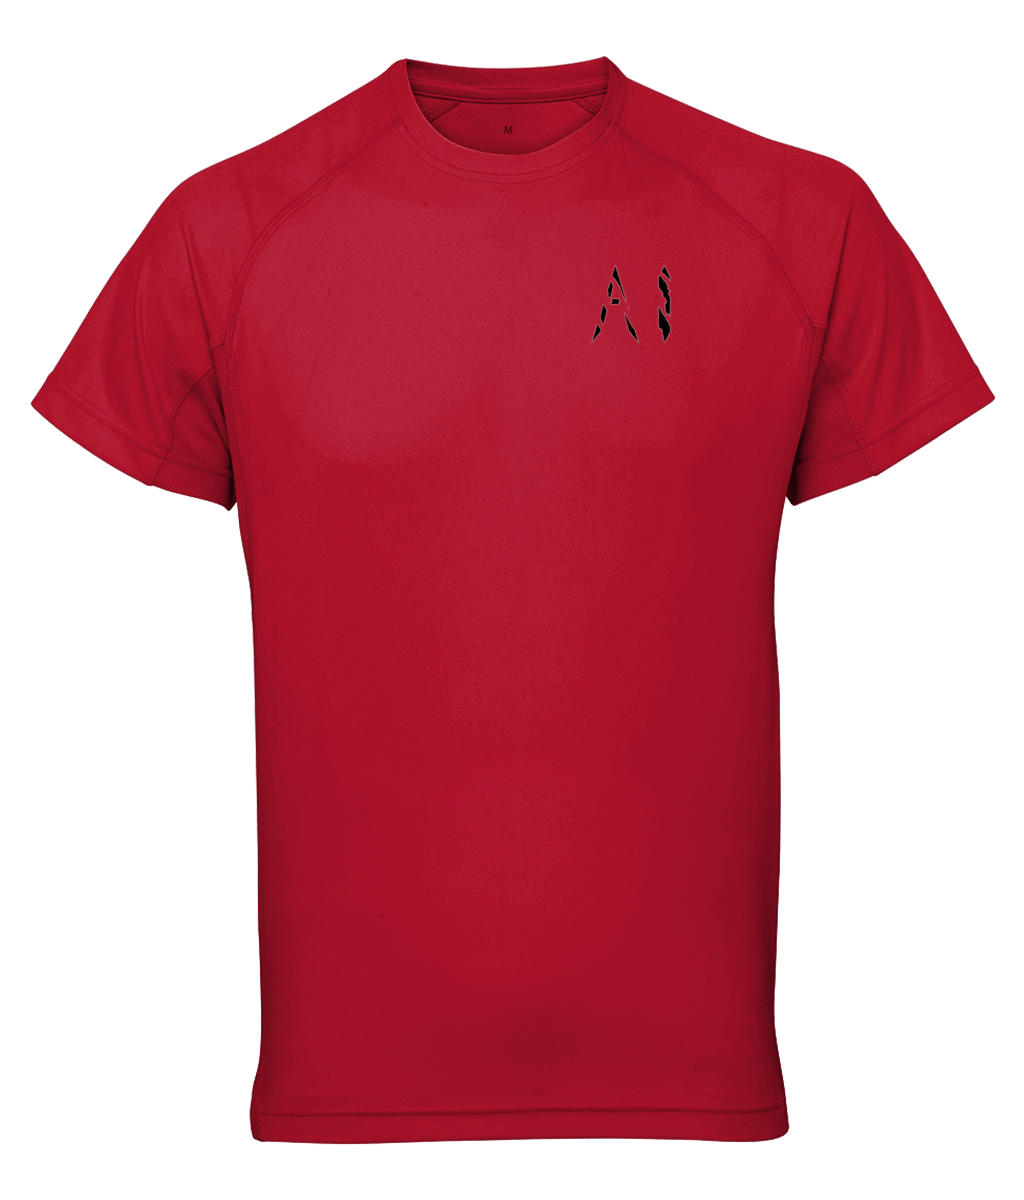 Womens Red Athletic Performance Top with black AI logo on left breast